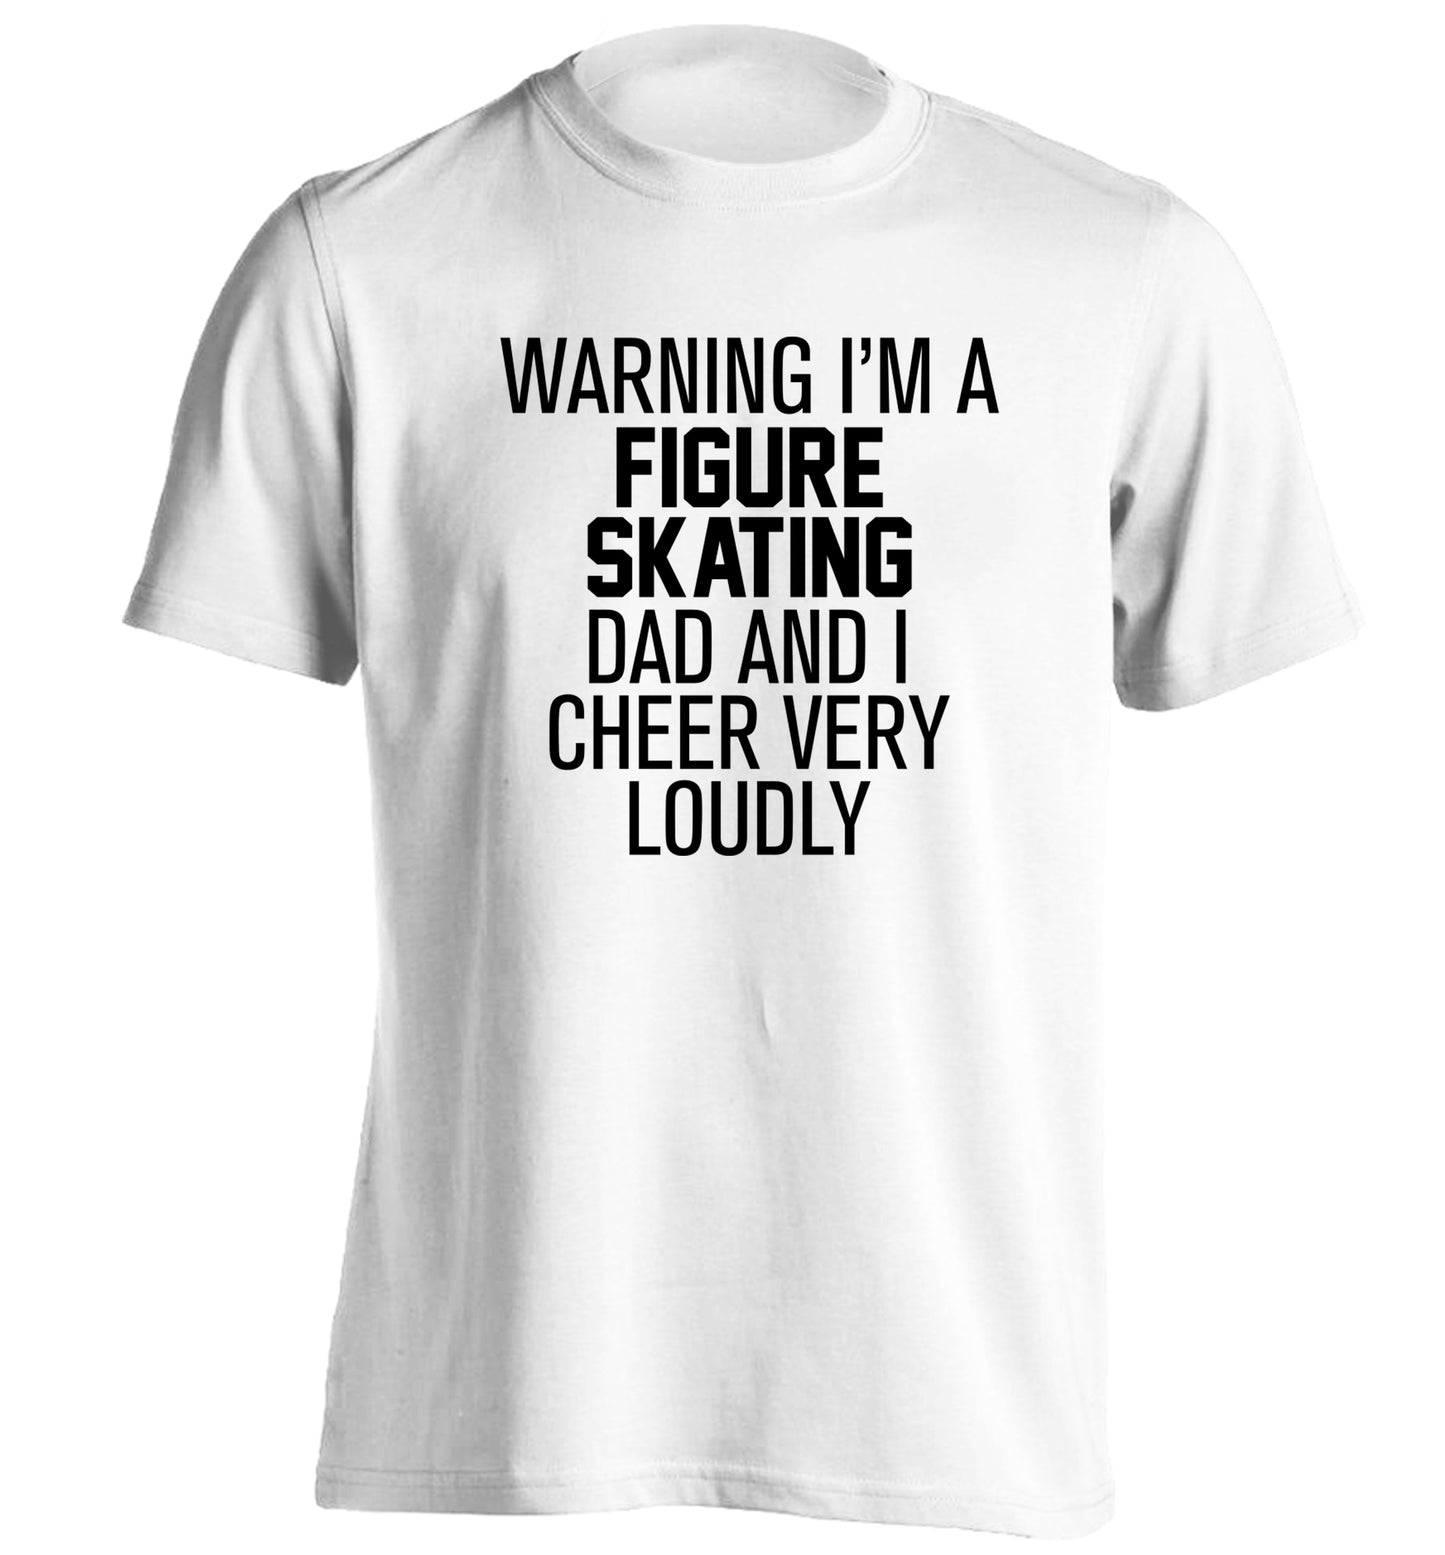 Warning I'm a figure skating dad and I cheer very loudly adults unisexwhite Tshirt 2XL